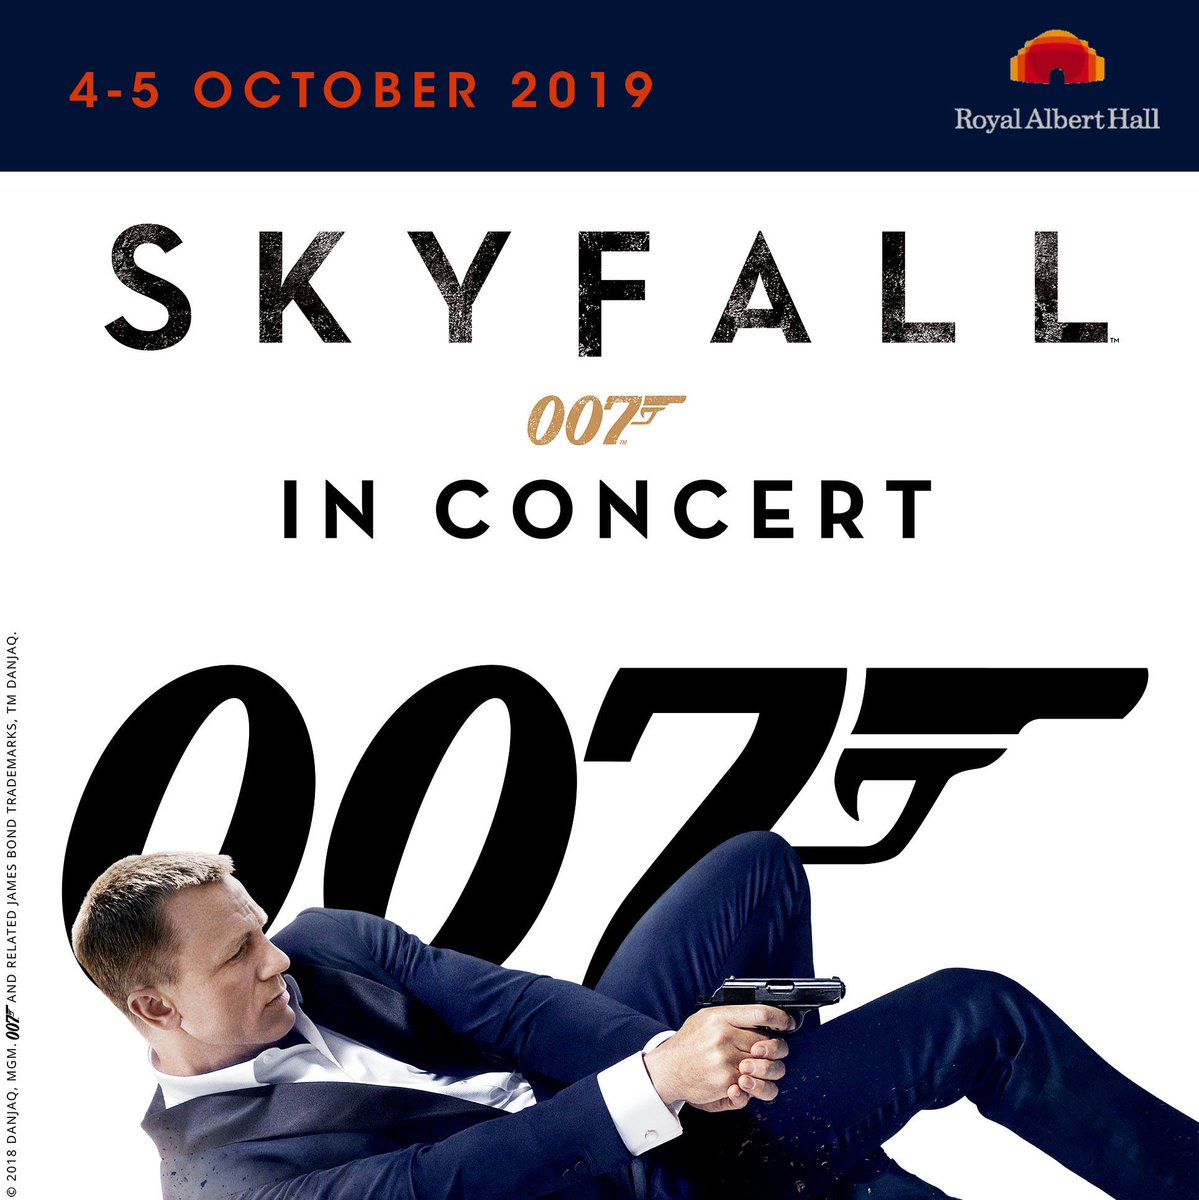 Royal Albert Hall On Twitter Tickets For Skyfall In Concert